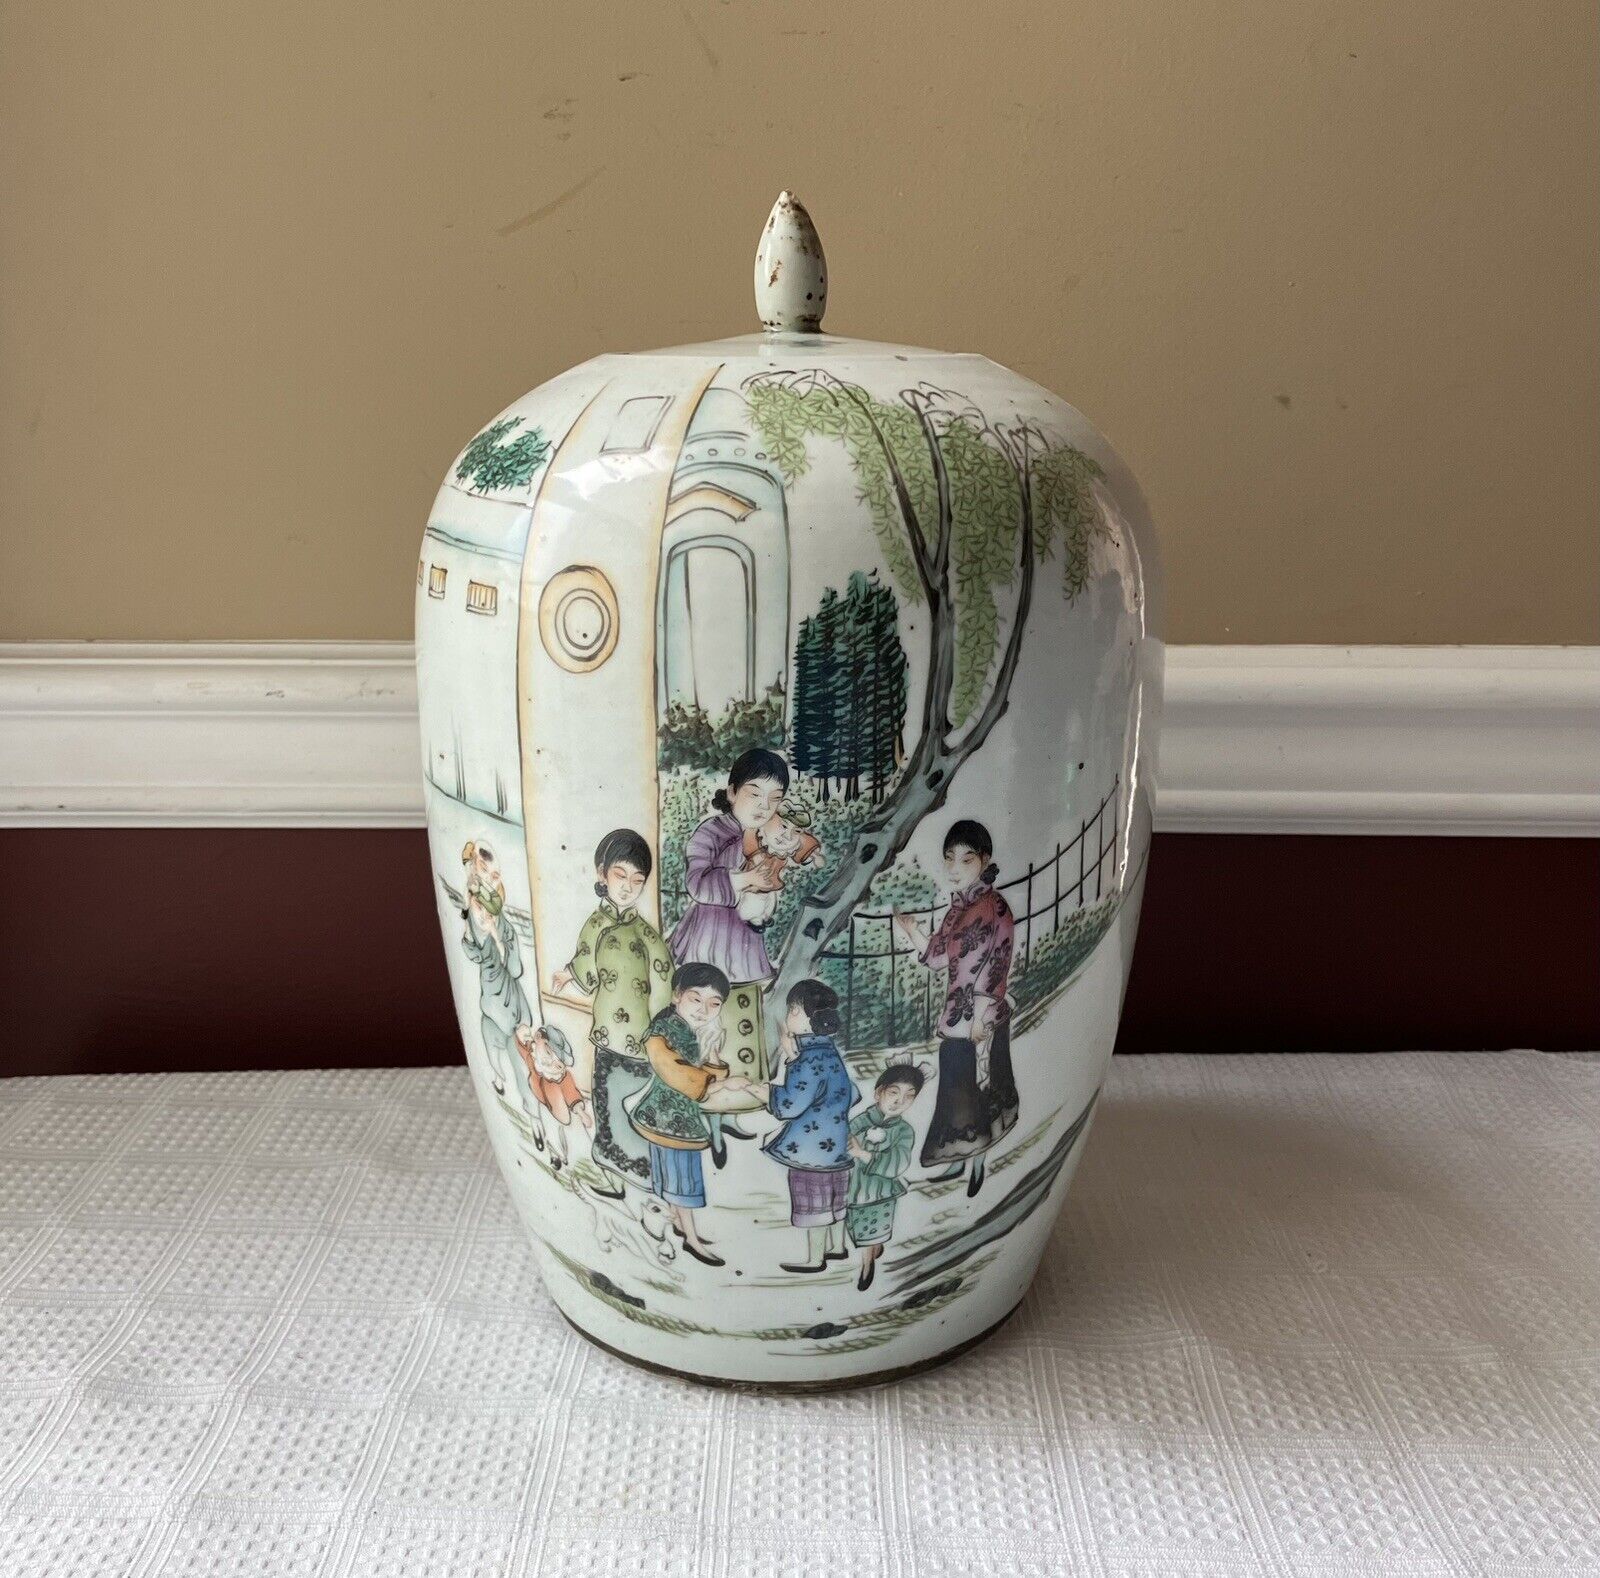 Large Antique Chinese Porcelain Palace-scene Covered Jar, 12.25” T x 7.5” W